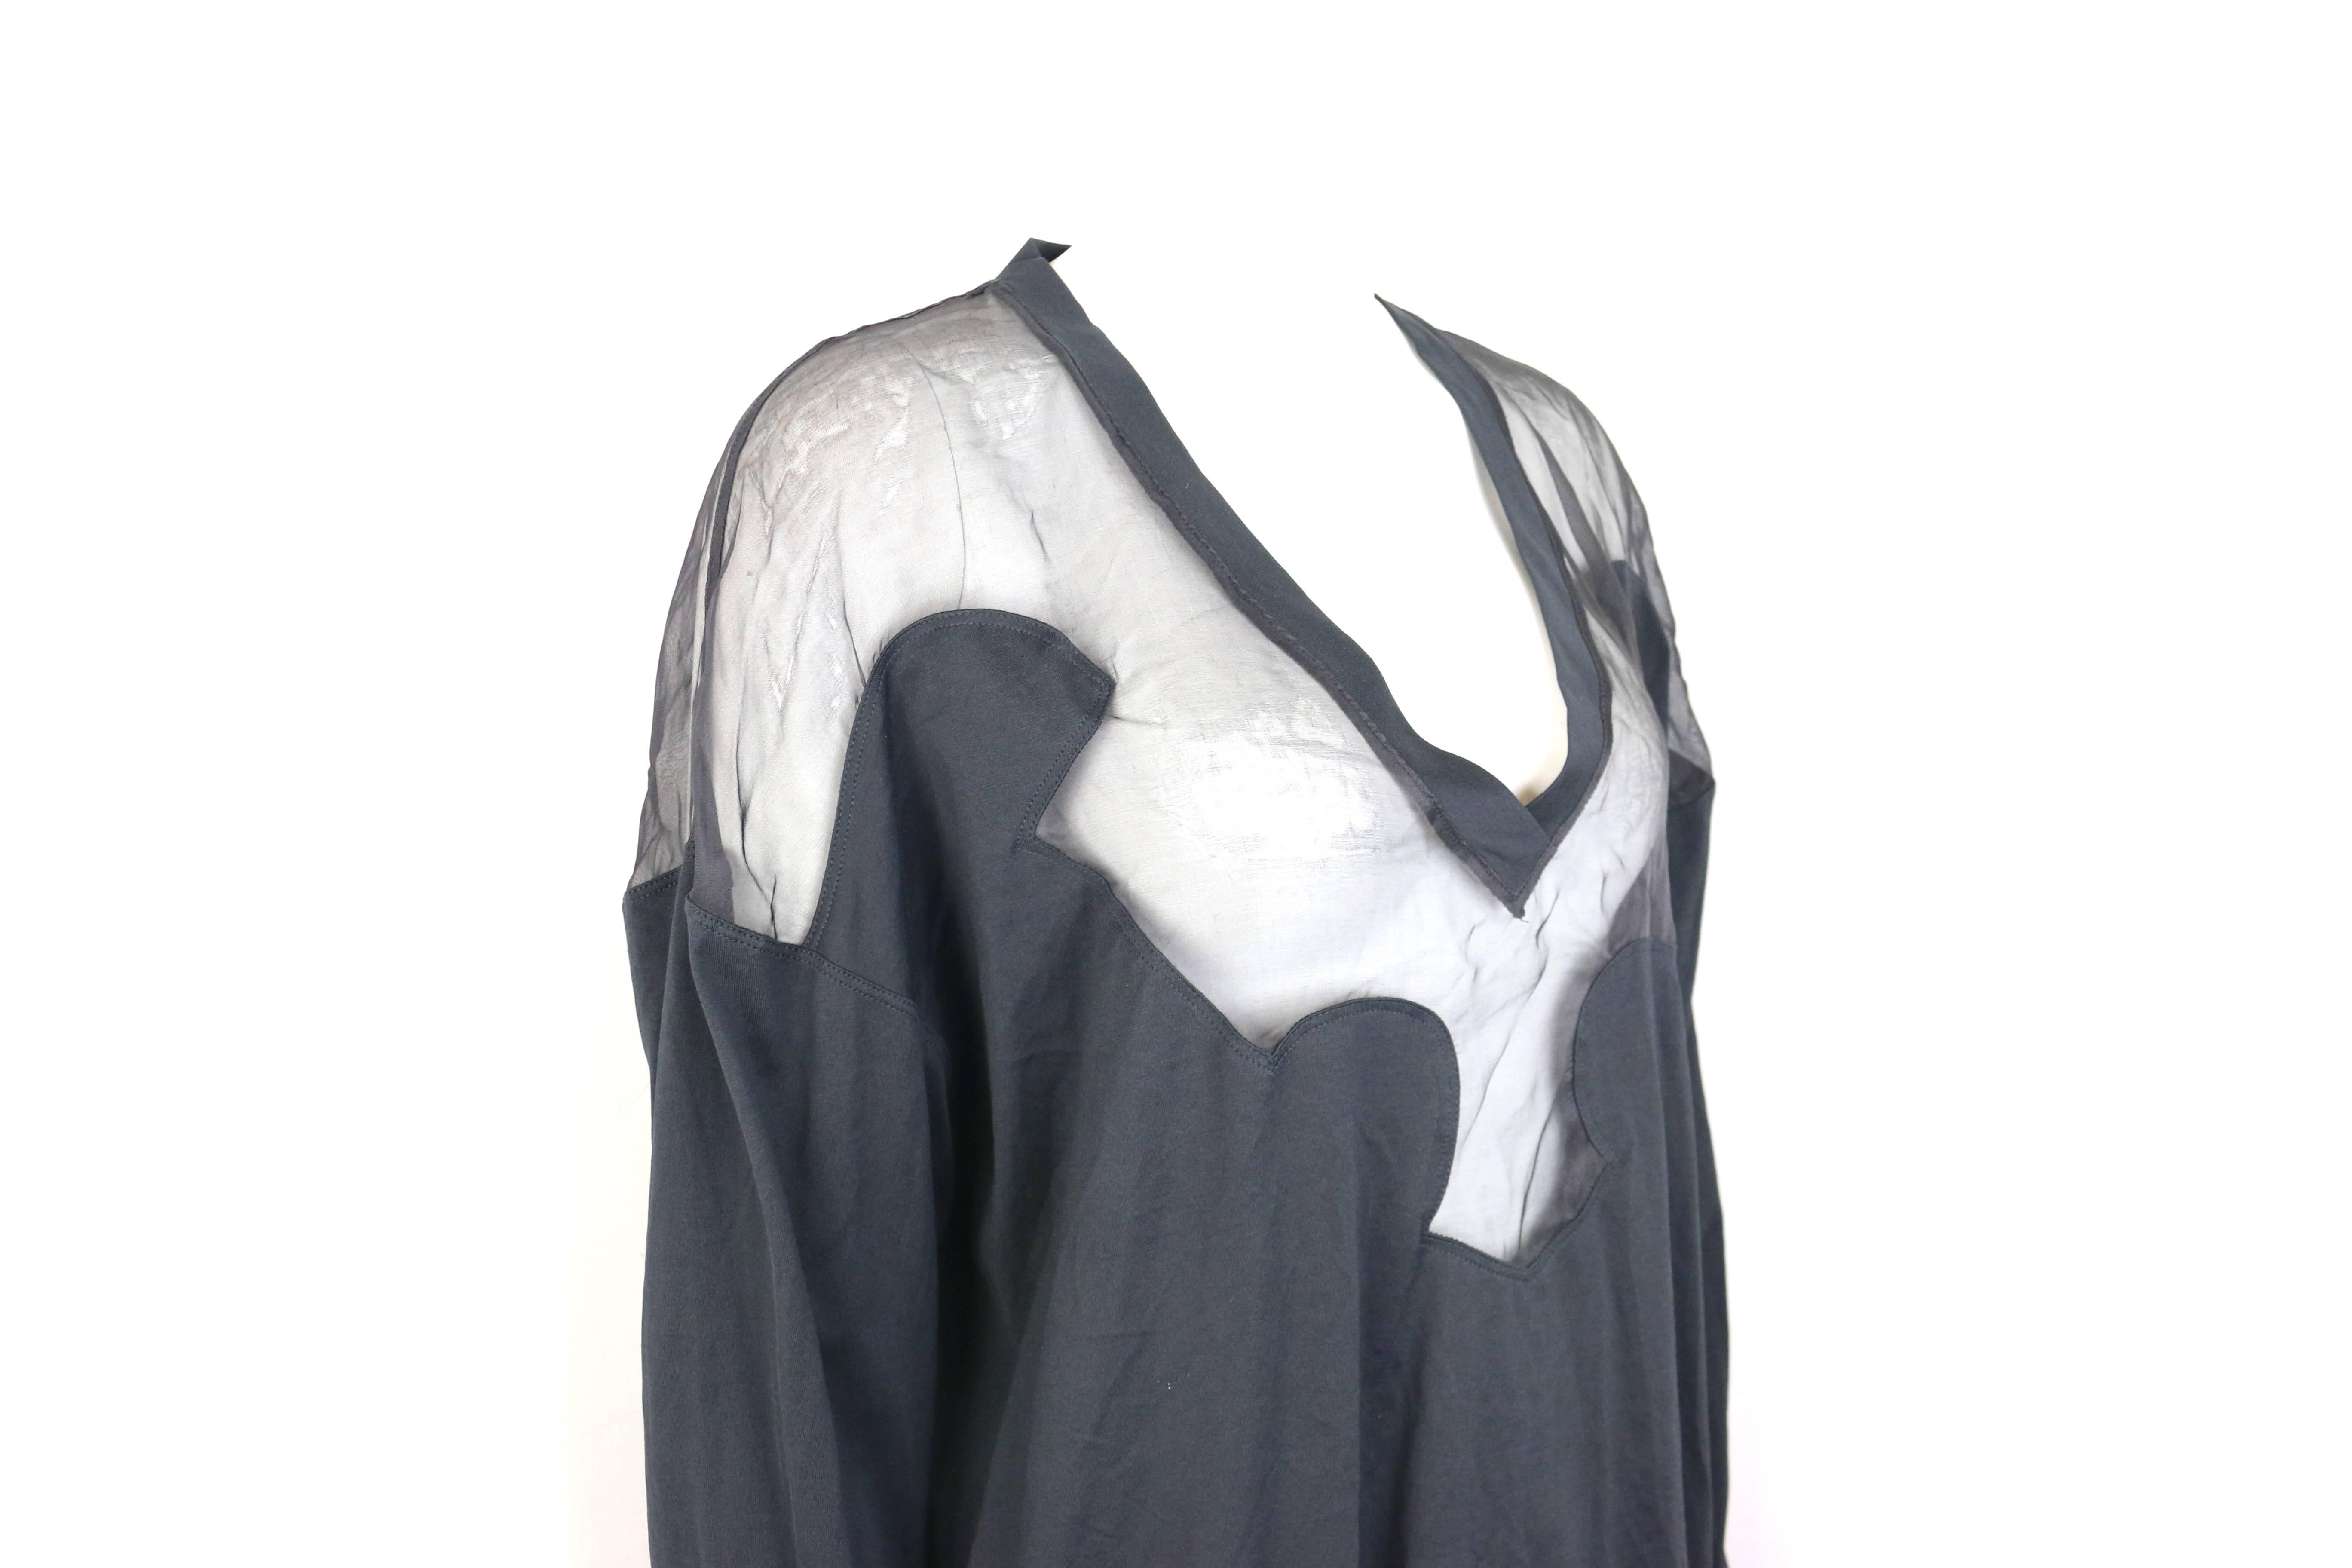 - Givenchy black cotton and silk long sleeves V-neck tunic top. 

- Featuring a transparent silk puzzle pattern and cotton body with cuff details. 

- Pullover top. 

- Size S. 

- 100% Cotton. 100% Silk. 

- Unworn with tags. 